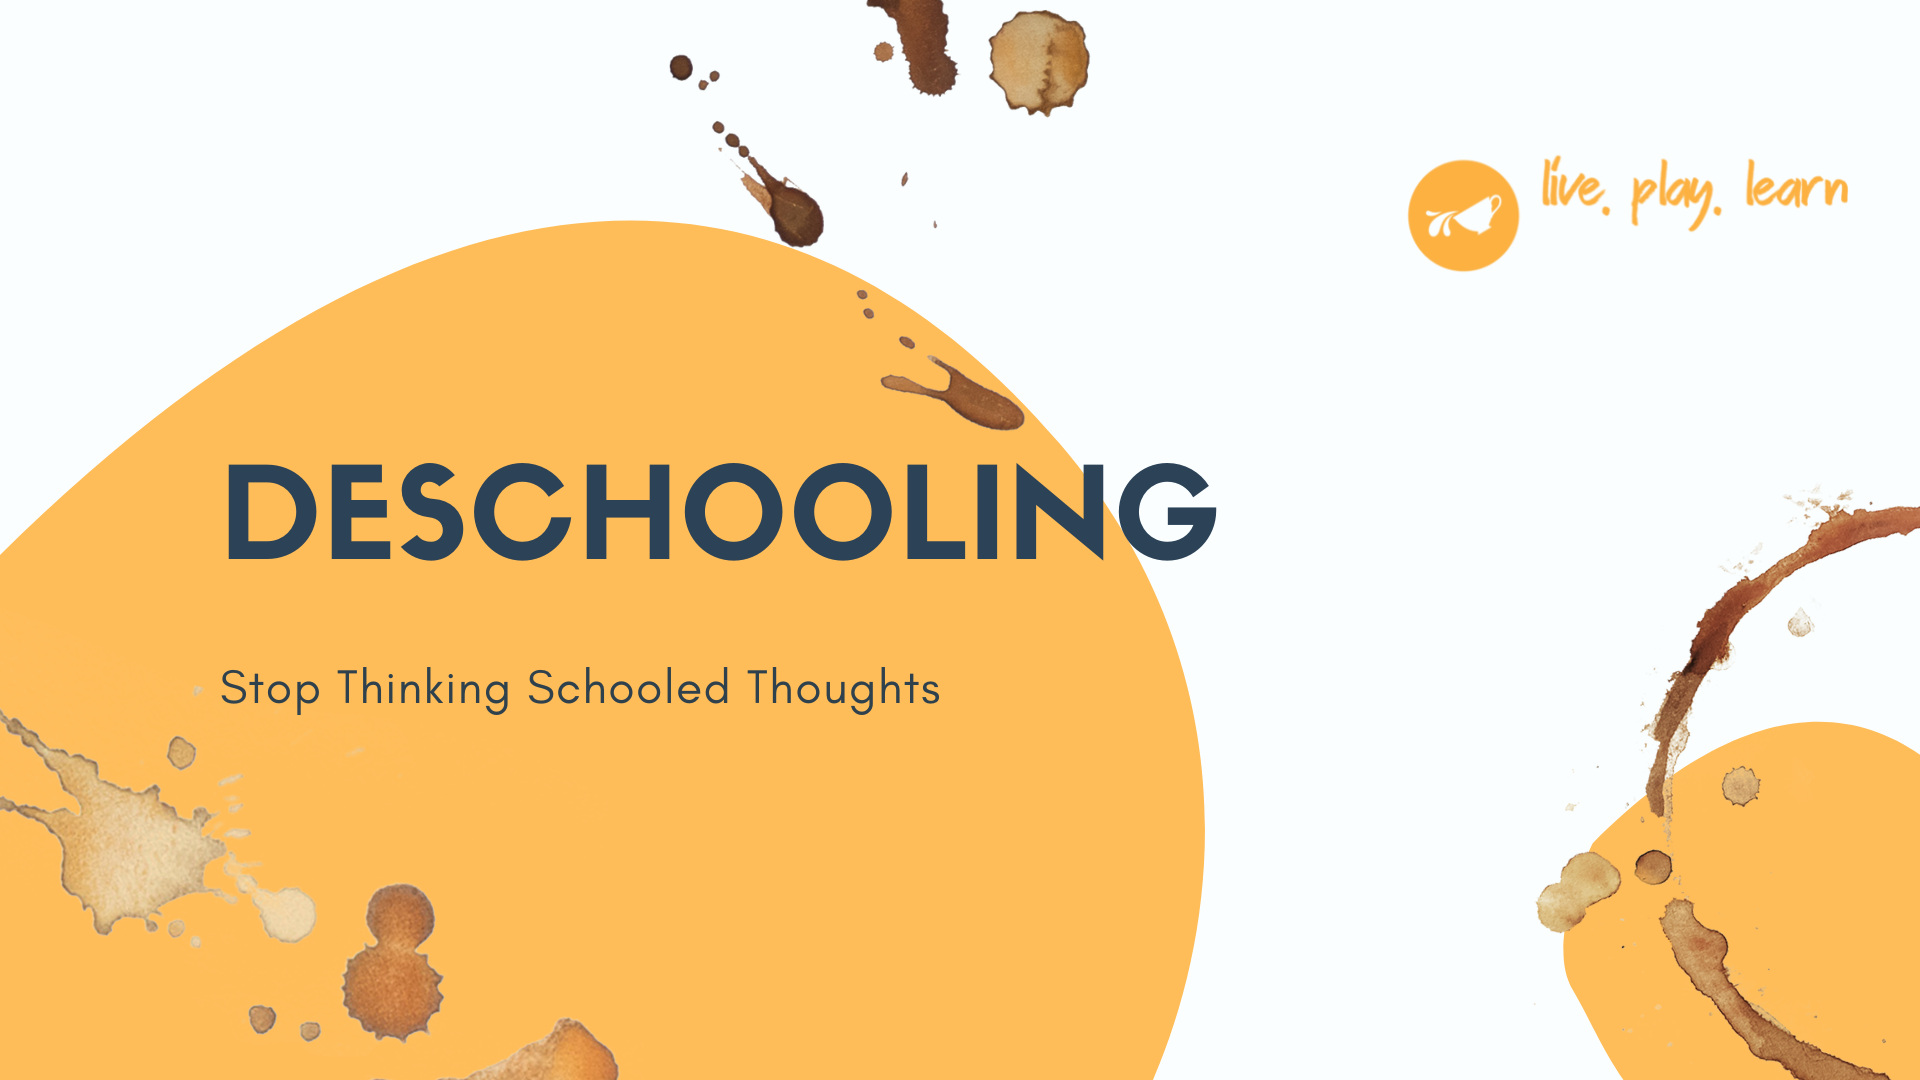 Deschooling: Stop Thinking Schooled Thoughts